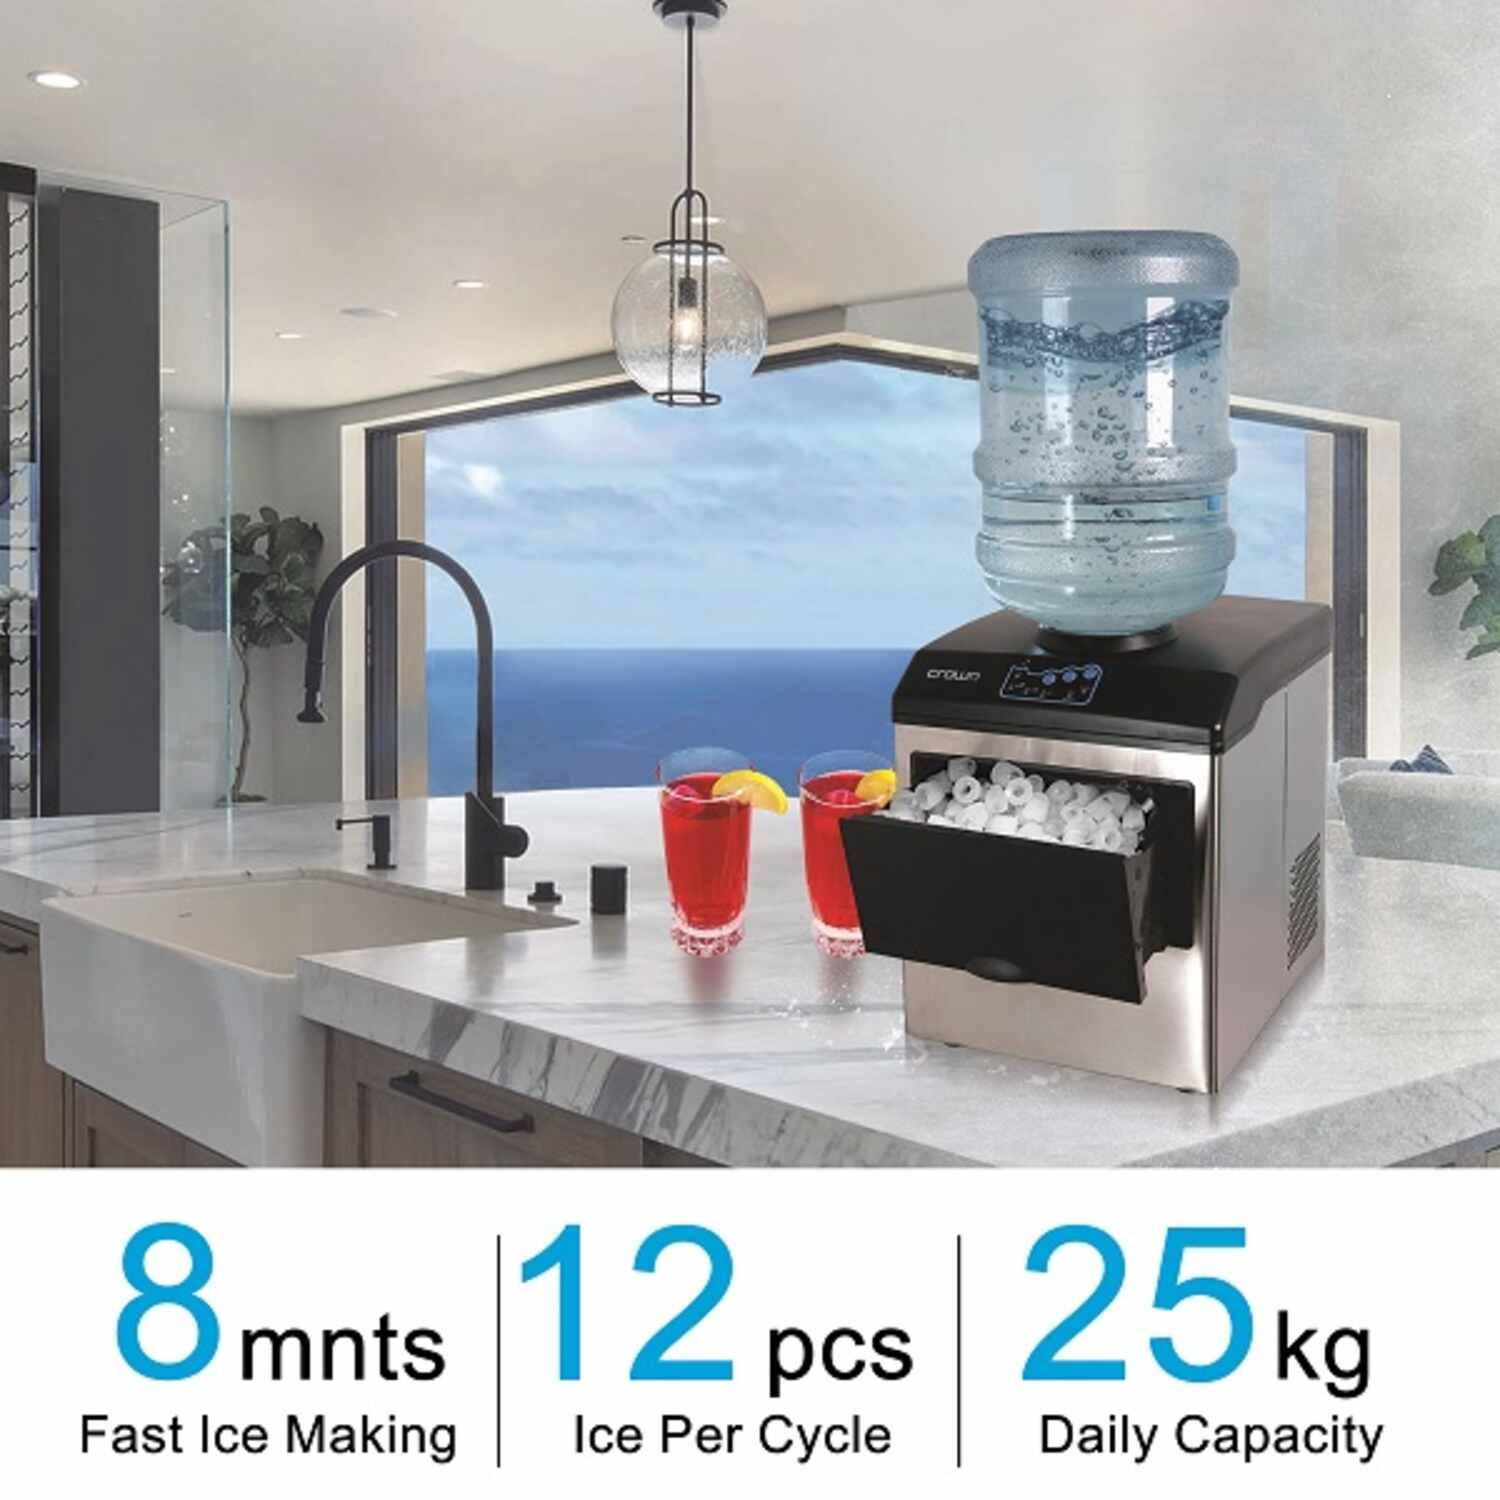 Crownline Table Top Water Dispenser With Ice Maker - Black & Silver